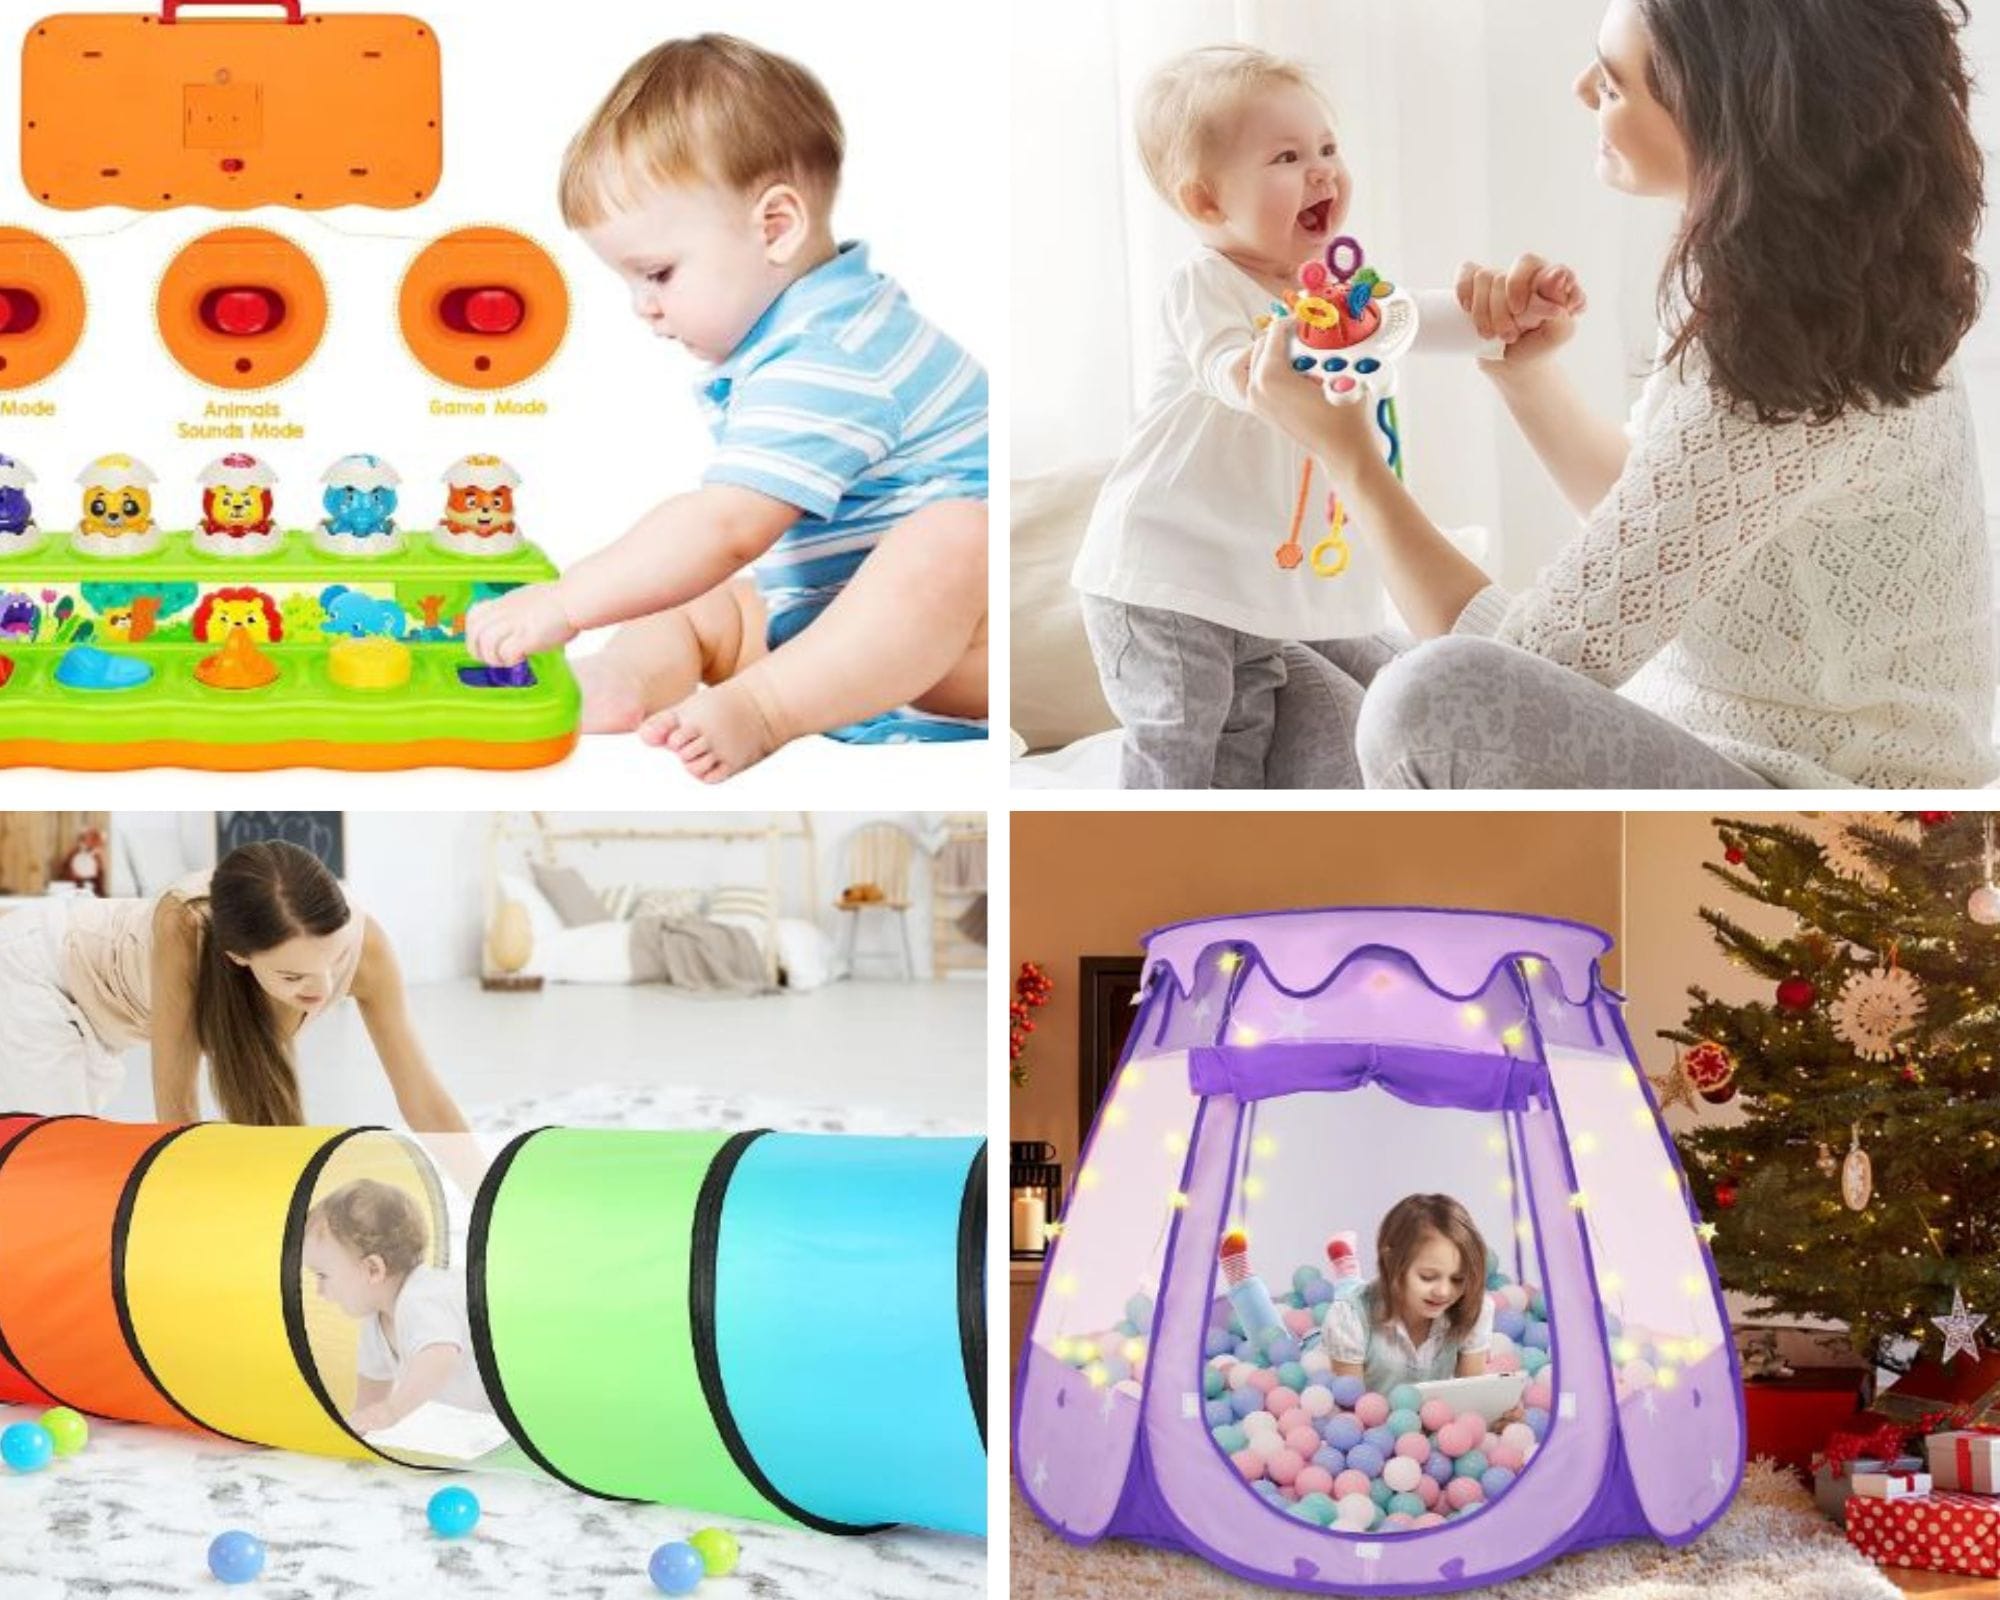 Spark Their Imagination Early! Check These Toys For Toddlers.